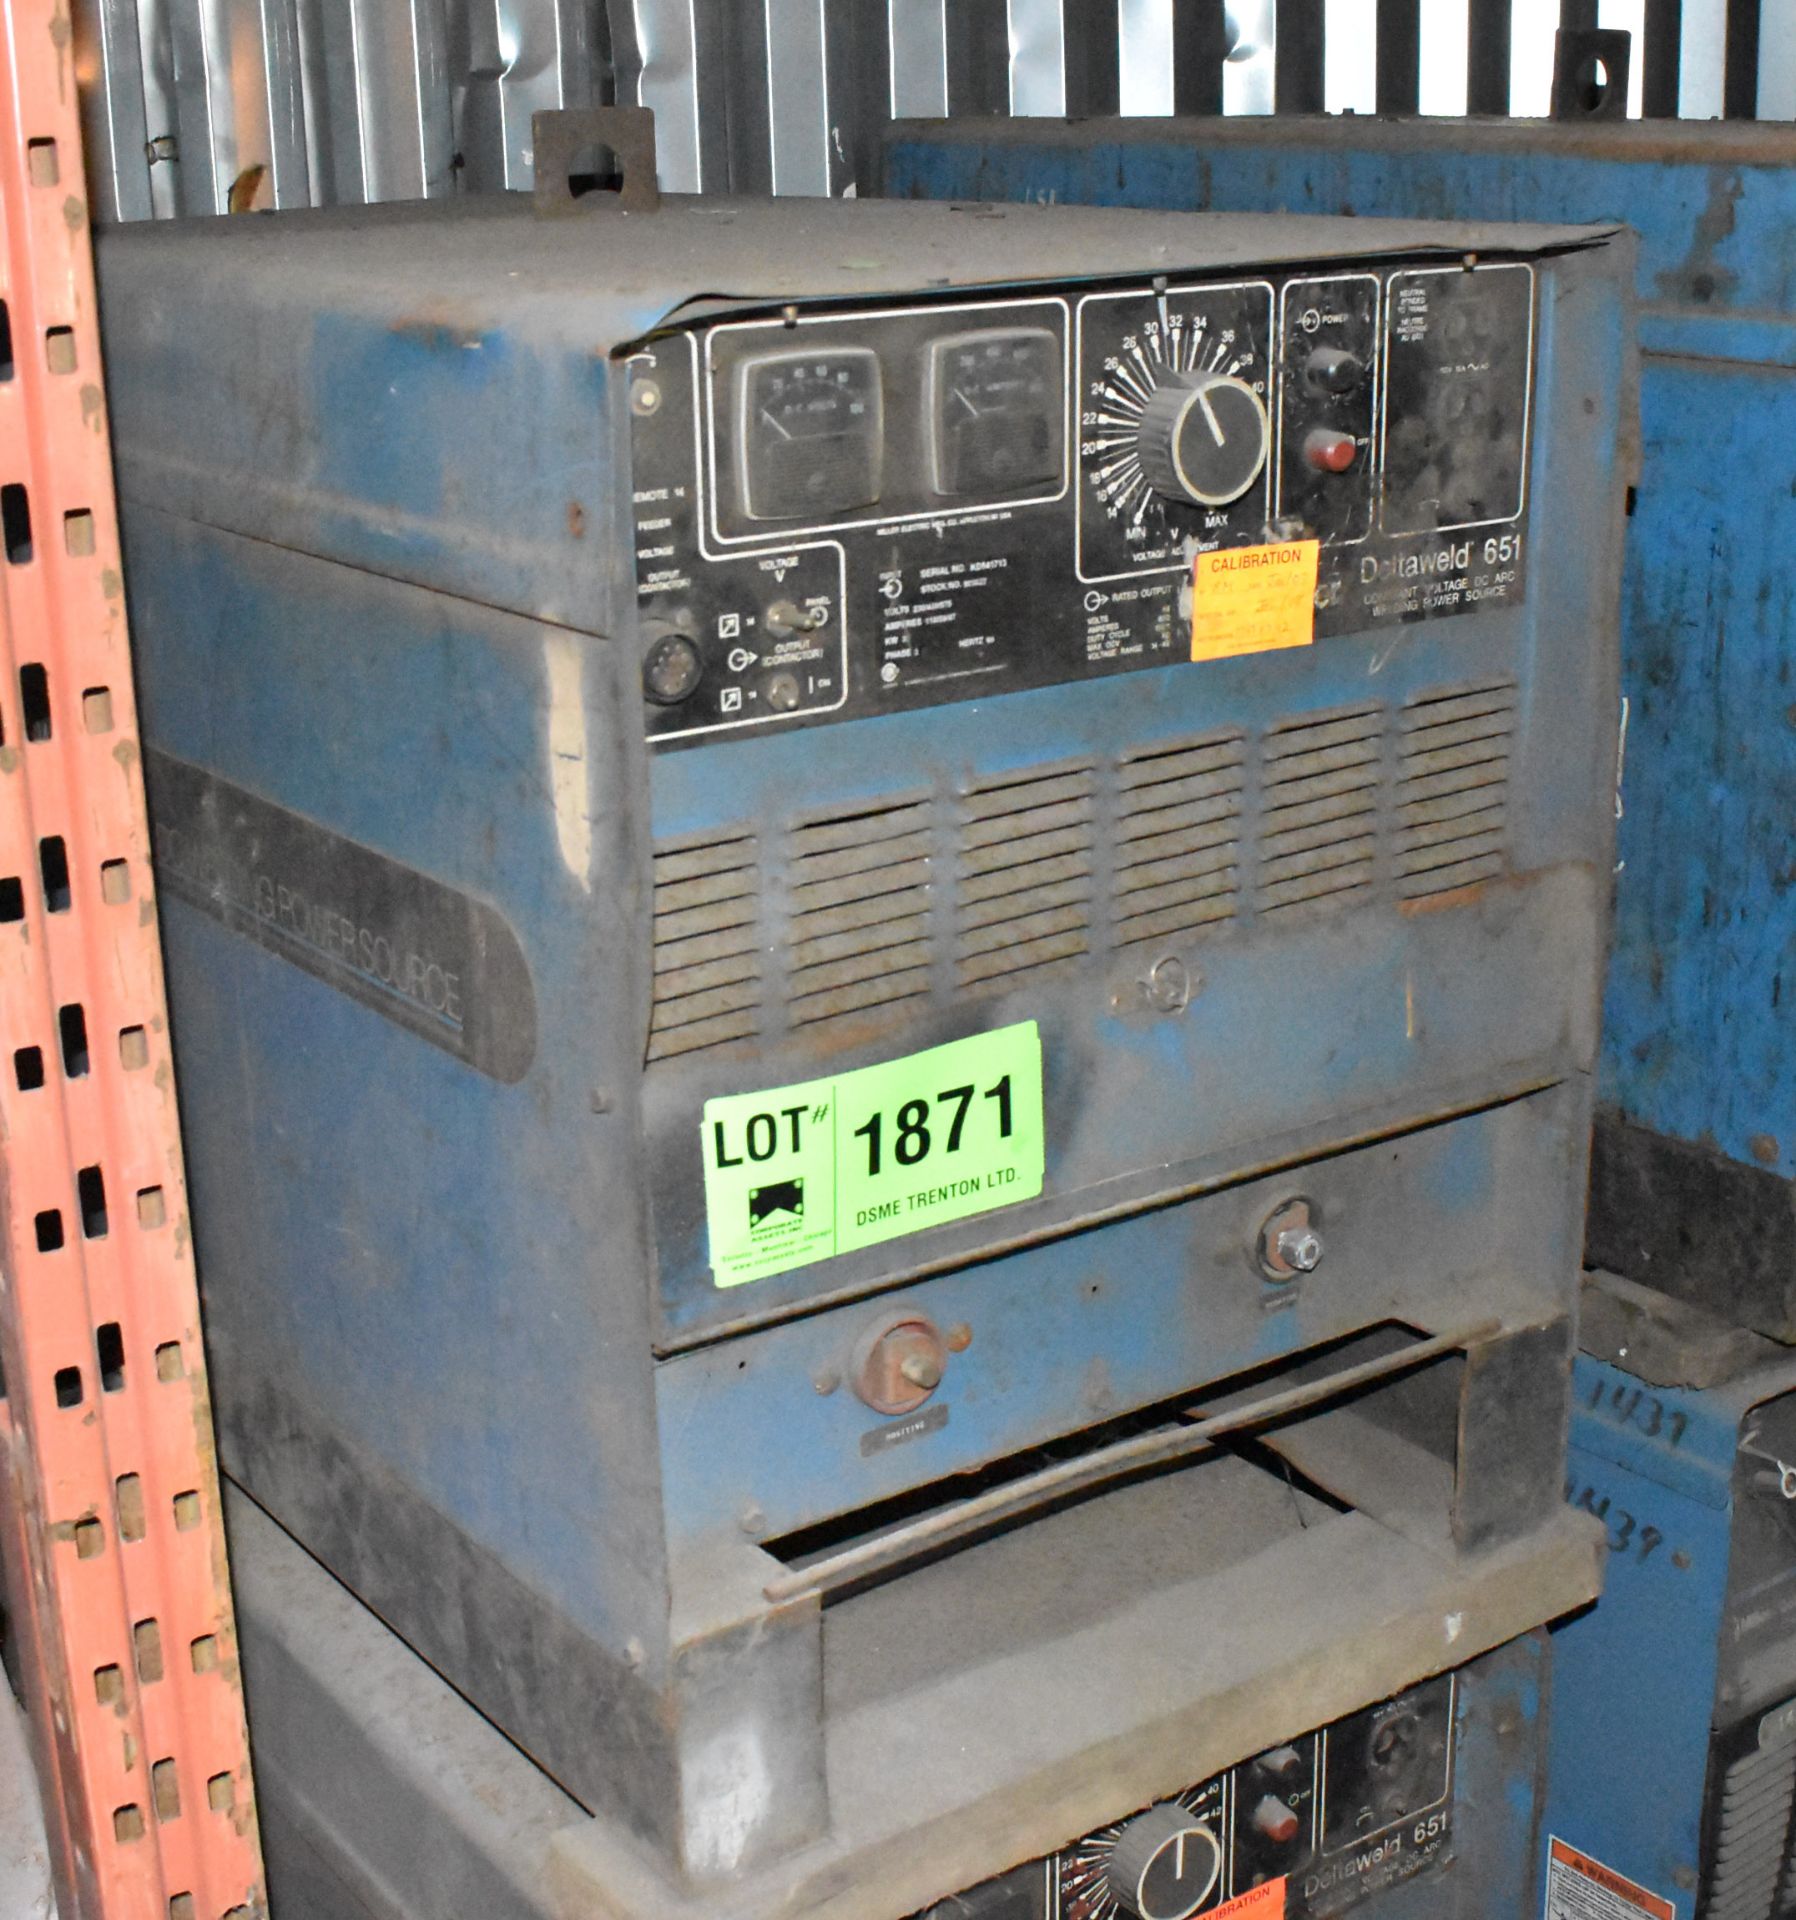 MILLER DELTAWELD 651 WELDING POWER SOURCE [RIGGING FEE FOR LOT# 1871 - $40 USD +PLUS TAXES]